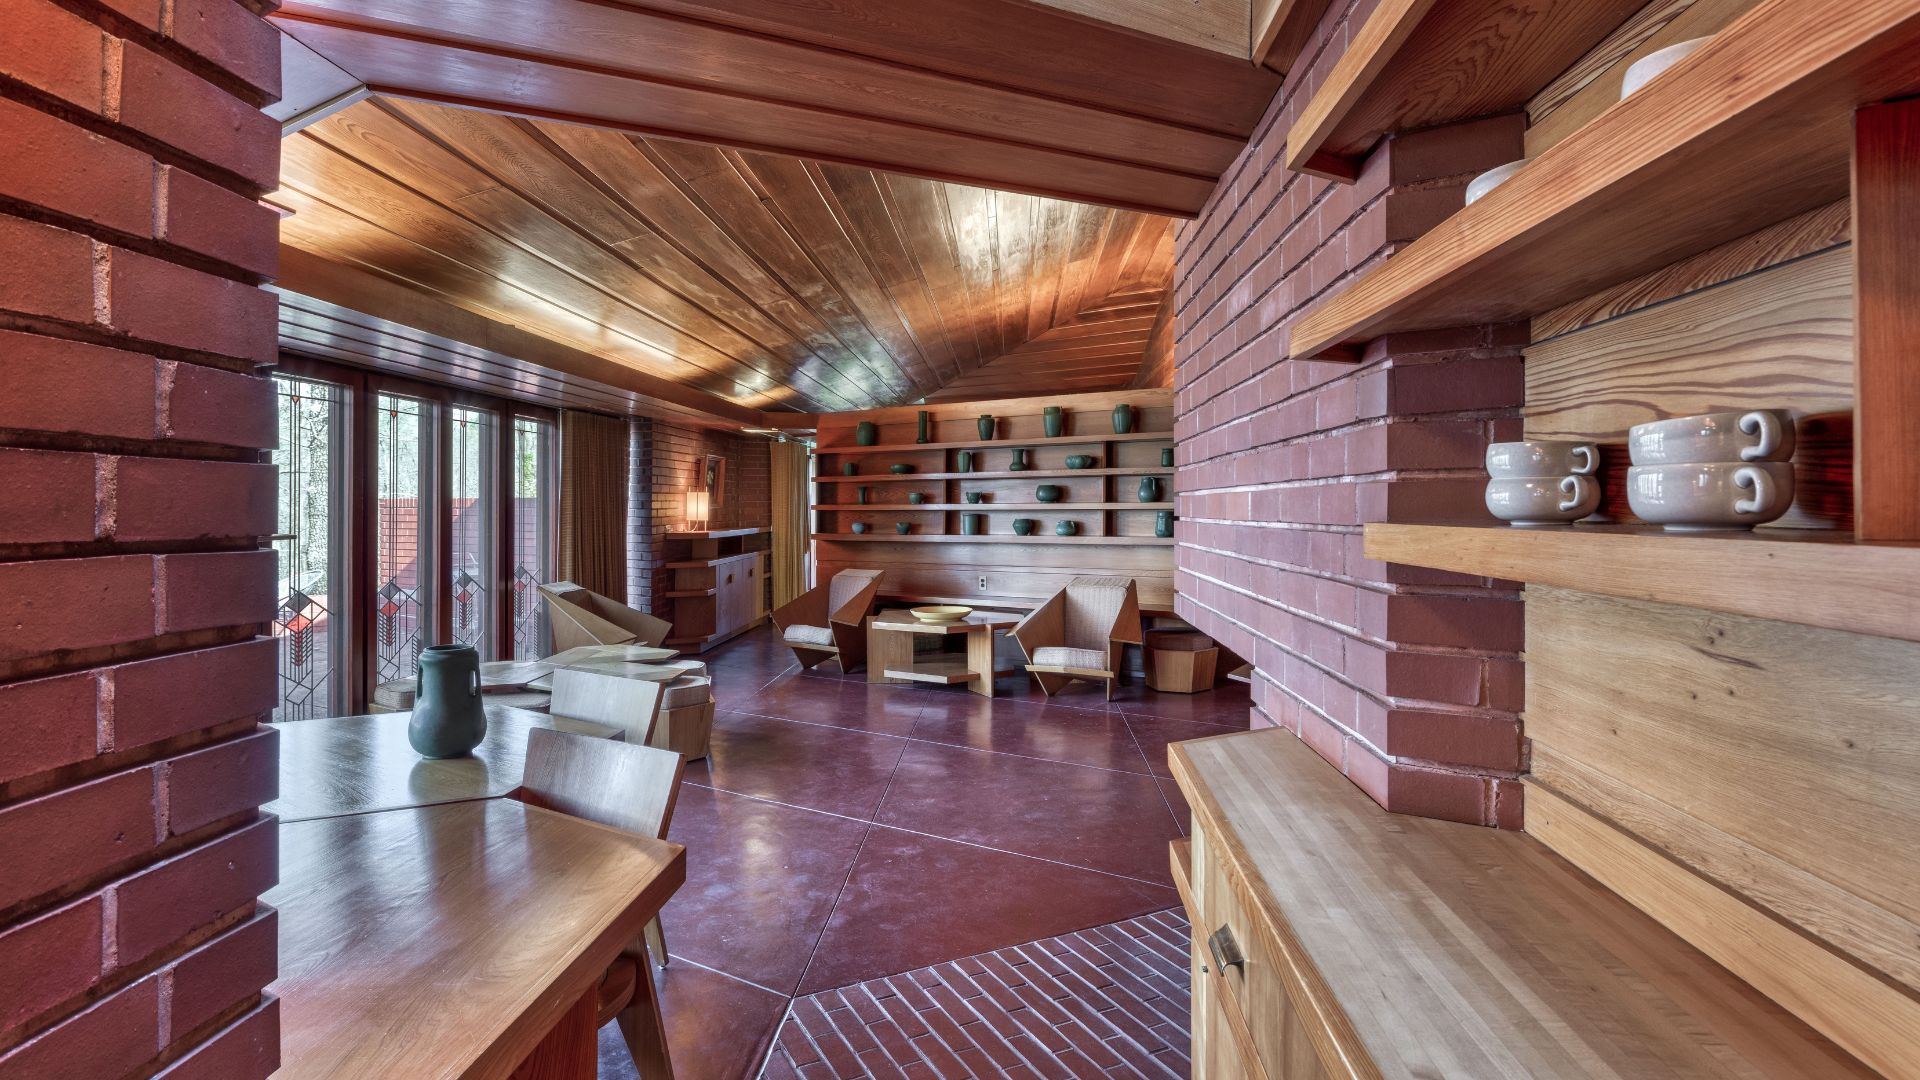 The Frank Lloyd Wright House in Ebsworth Park has an open living room and a central hearth.